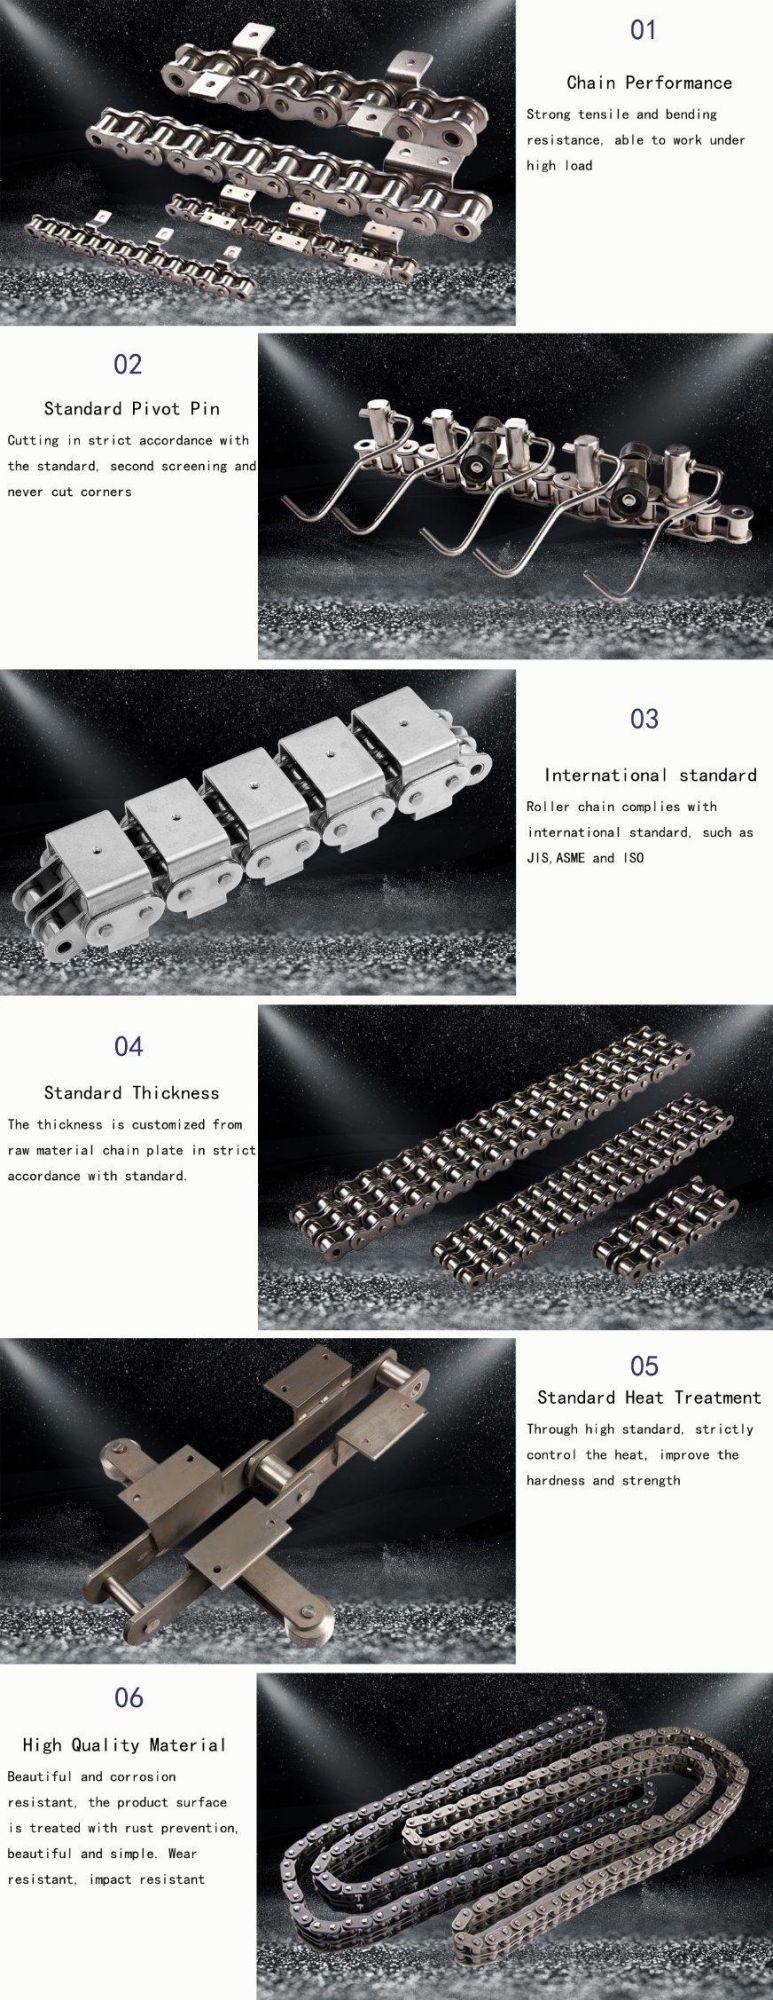 Roller Chain Manufacturer Industrial Agricultural Machinery Stainless Steel Double Pitch Conveyor Transmission Attachment A1 & A2 & K1 & K2 Roller Chain